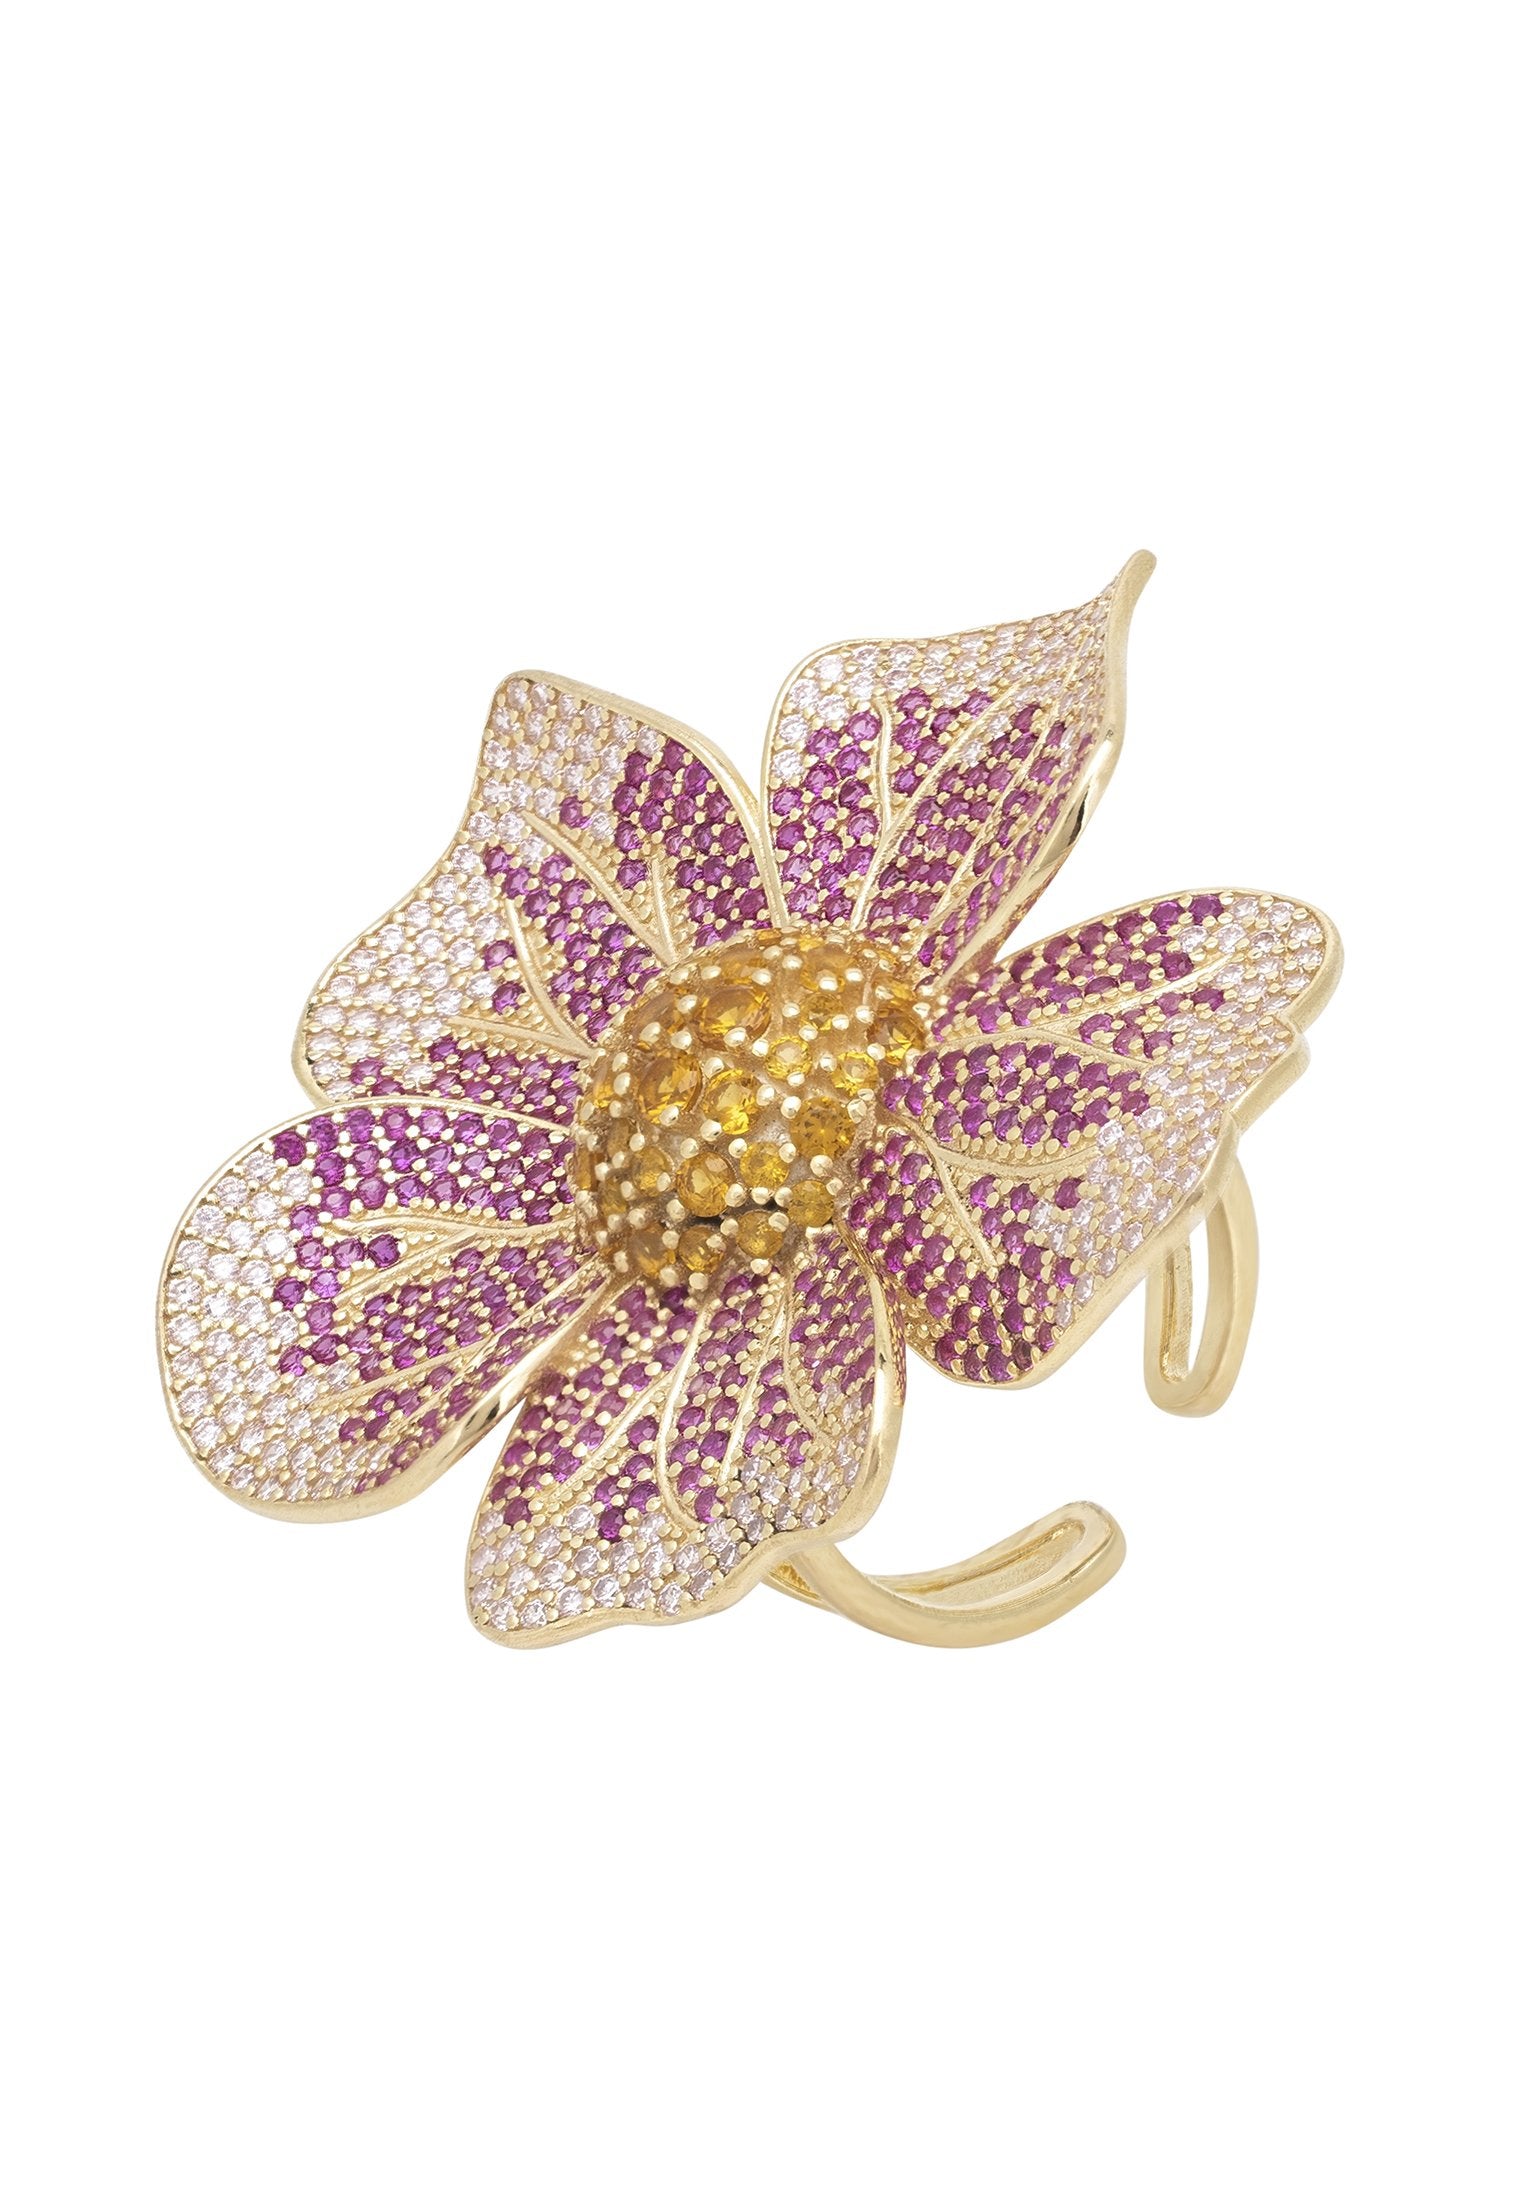 Pink Pansy Flower Cocktail Ring with Cubic Zirconia in Gold Plated Sterling Silver - Ideal Gift for Loved Ones - Jewelry & Watches - Bijou Her -  -  - 